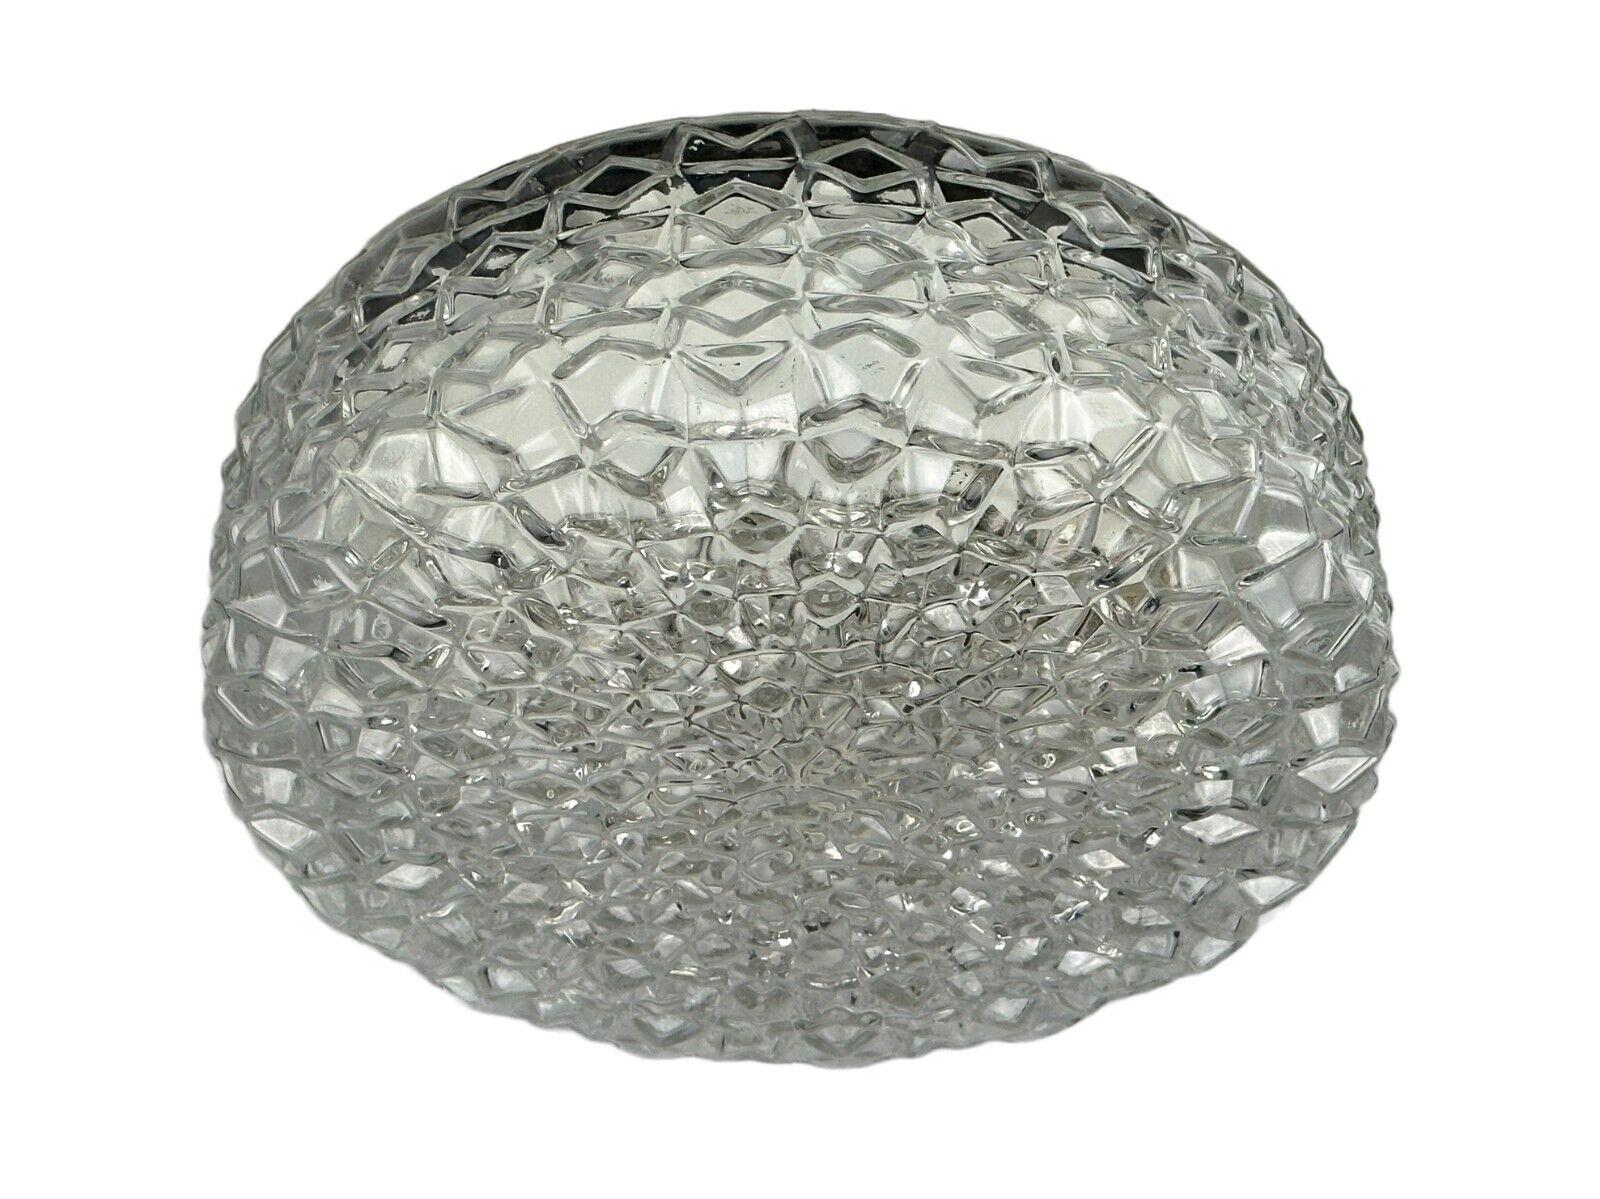 60s 70s ceiling lamp or wall lamp made of glass & metal space age design

Object: ceiling lamp

Manufacturer: RZB

Condition: good - vintage

Age: around 1960-1970

Dimensions:

Diameter = 30cm
Height = 11cm

Material: glass, metal

Other